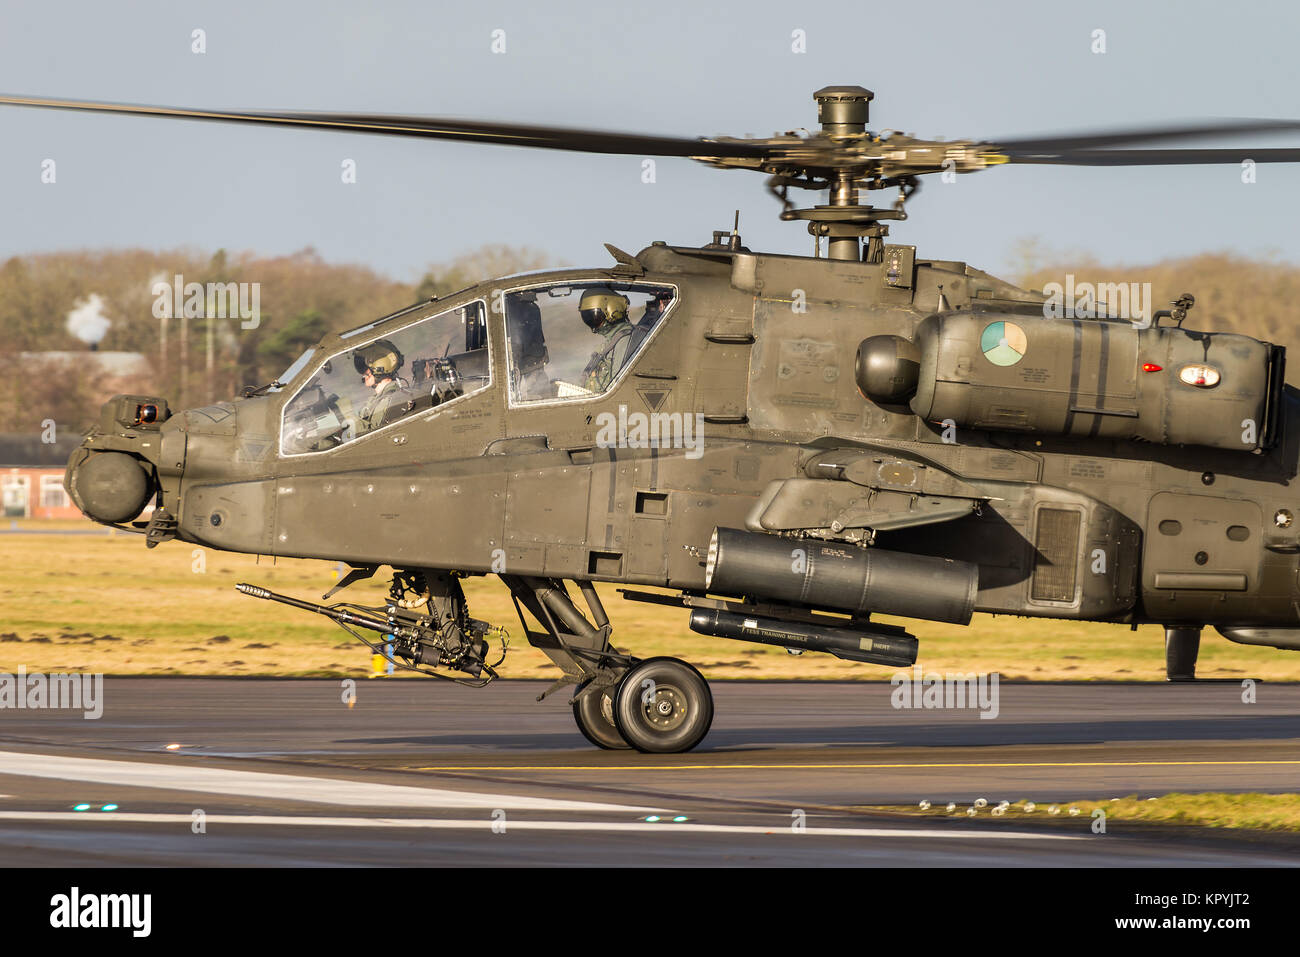 A Boeing AH-64 Apache attack helicopter of the Royal Netherlands Air Force at the Gilze-Rijen Air Base. Stock Photo